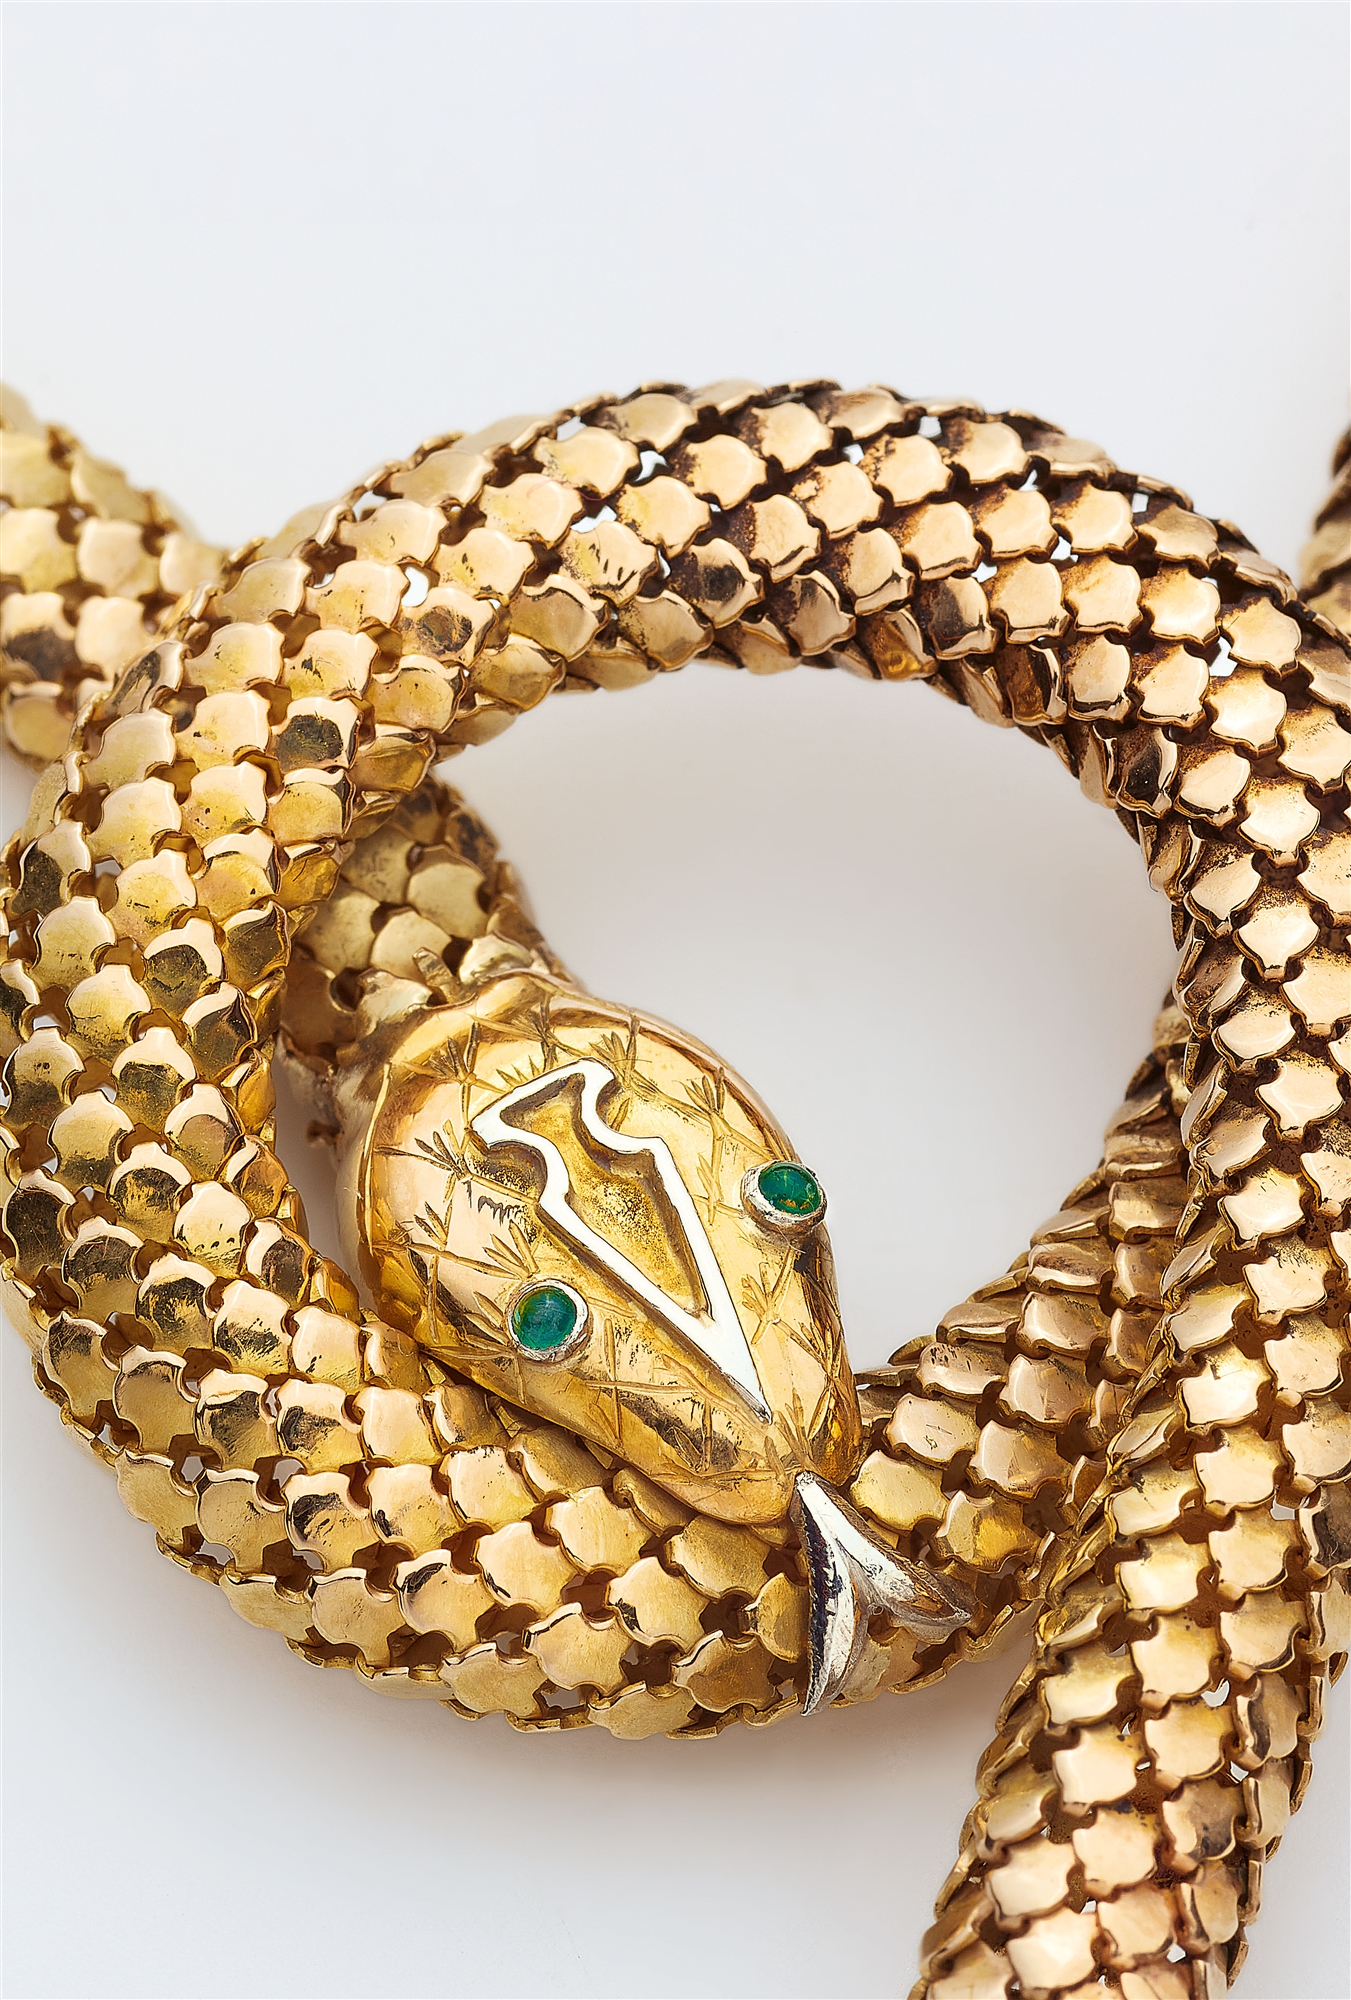 A flexible 18k red gold tubogaz snake necklace with emerald eyes. - Image 2 of 3